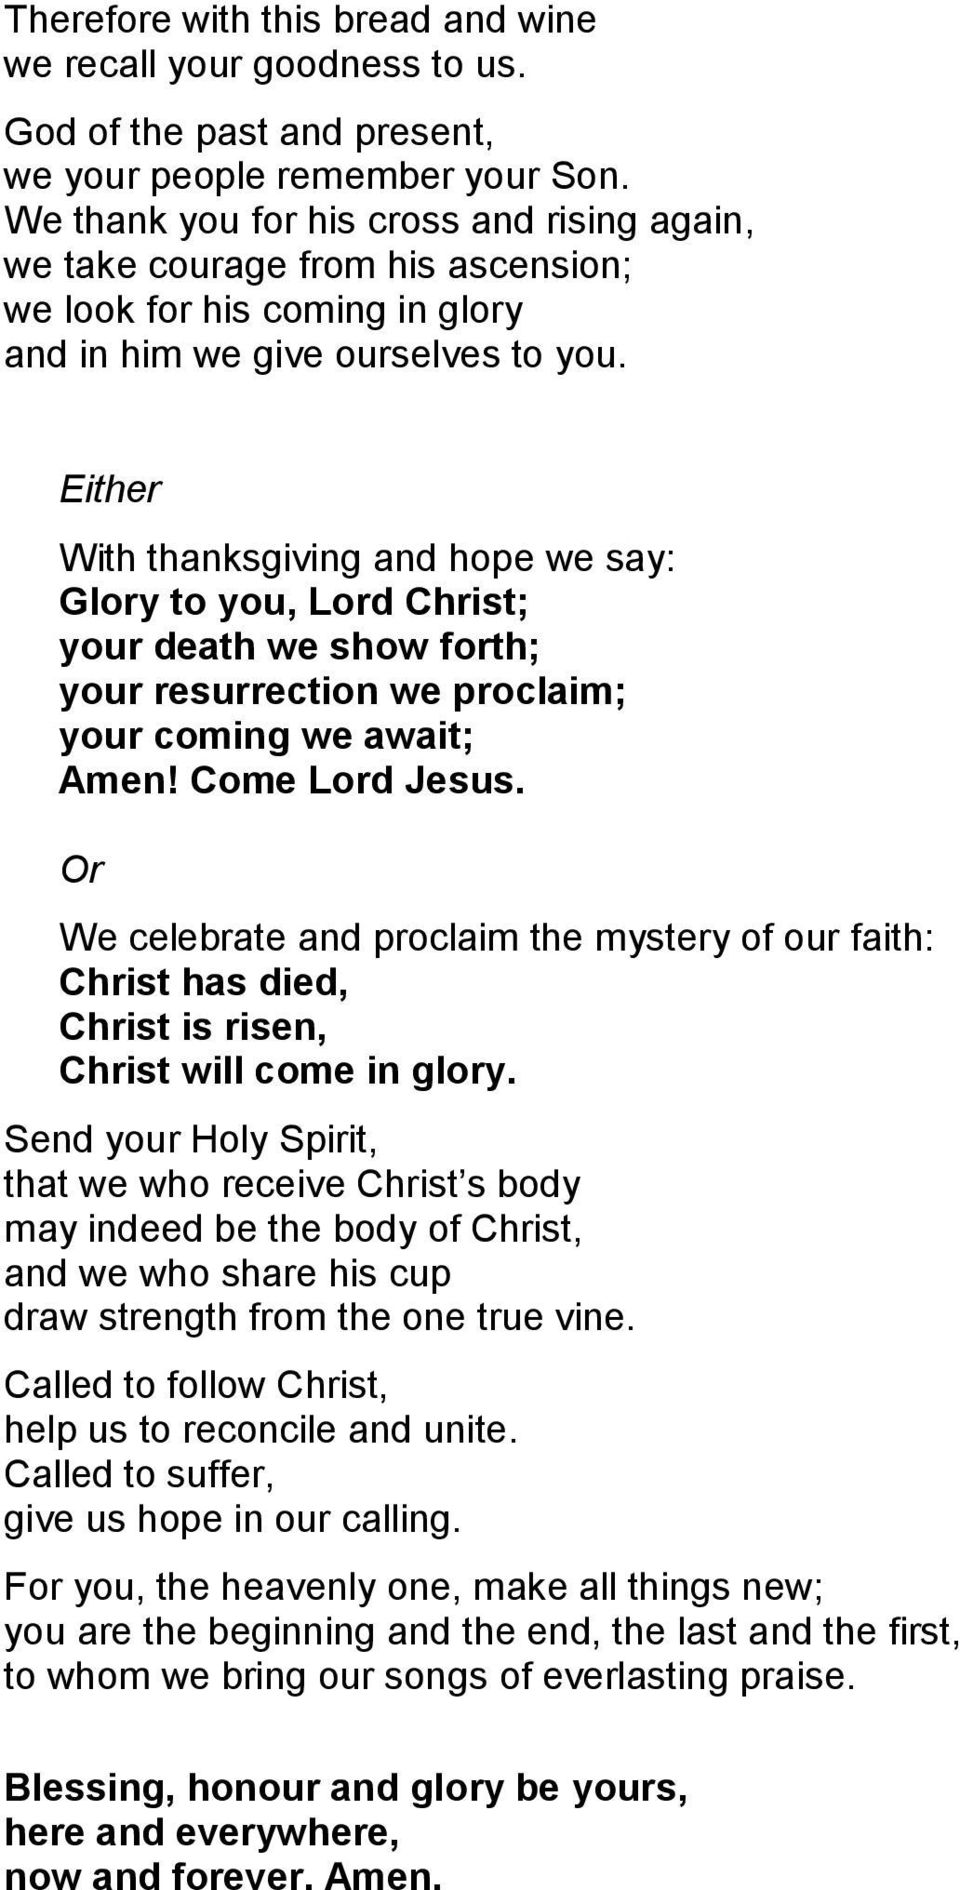 Either With thanksgiving and hope we say: Glory to you, Lord Christ; your death we show forth; your resurrection we proclaim; your coming we await; Amen! Come Lord Jesus.